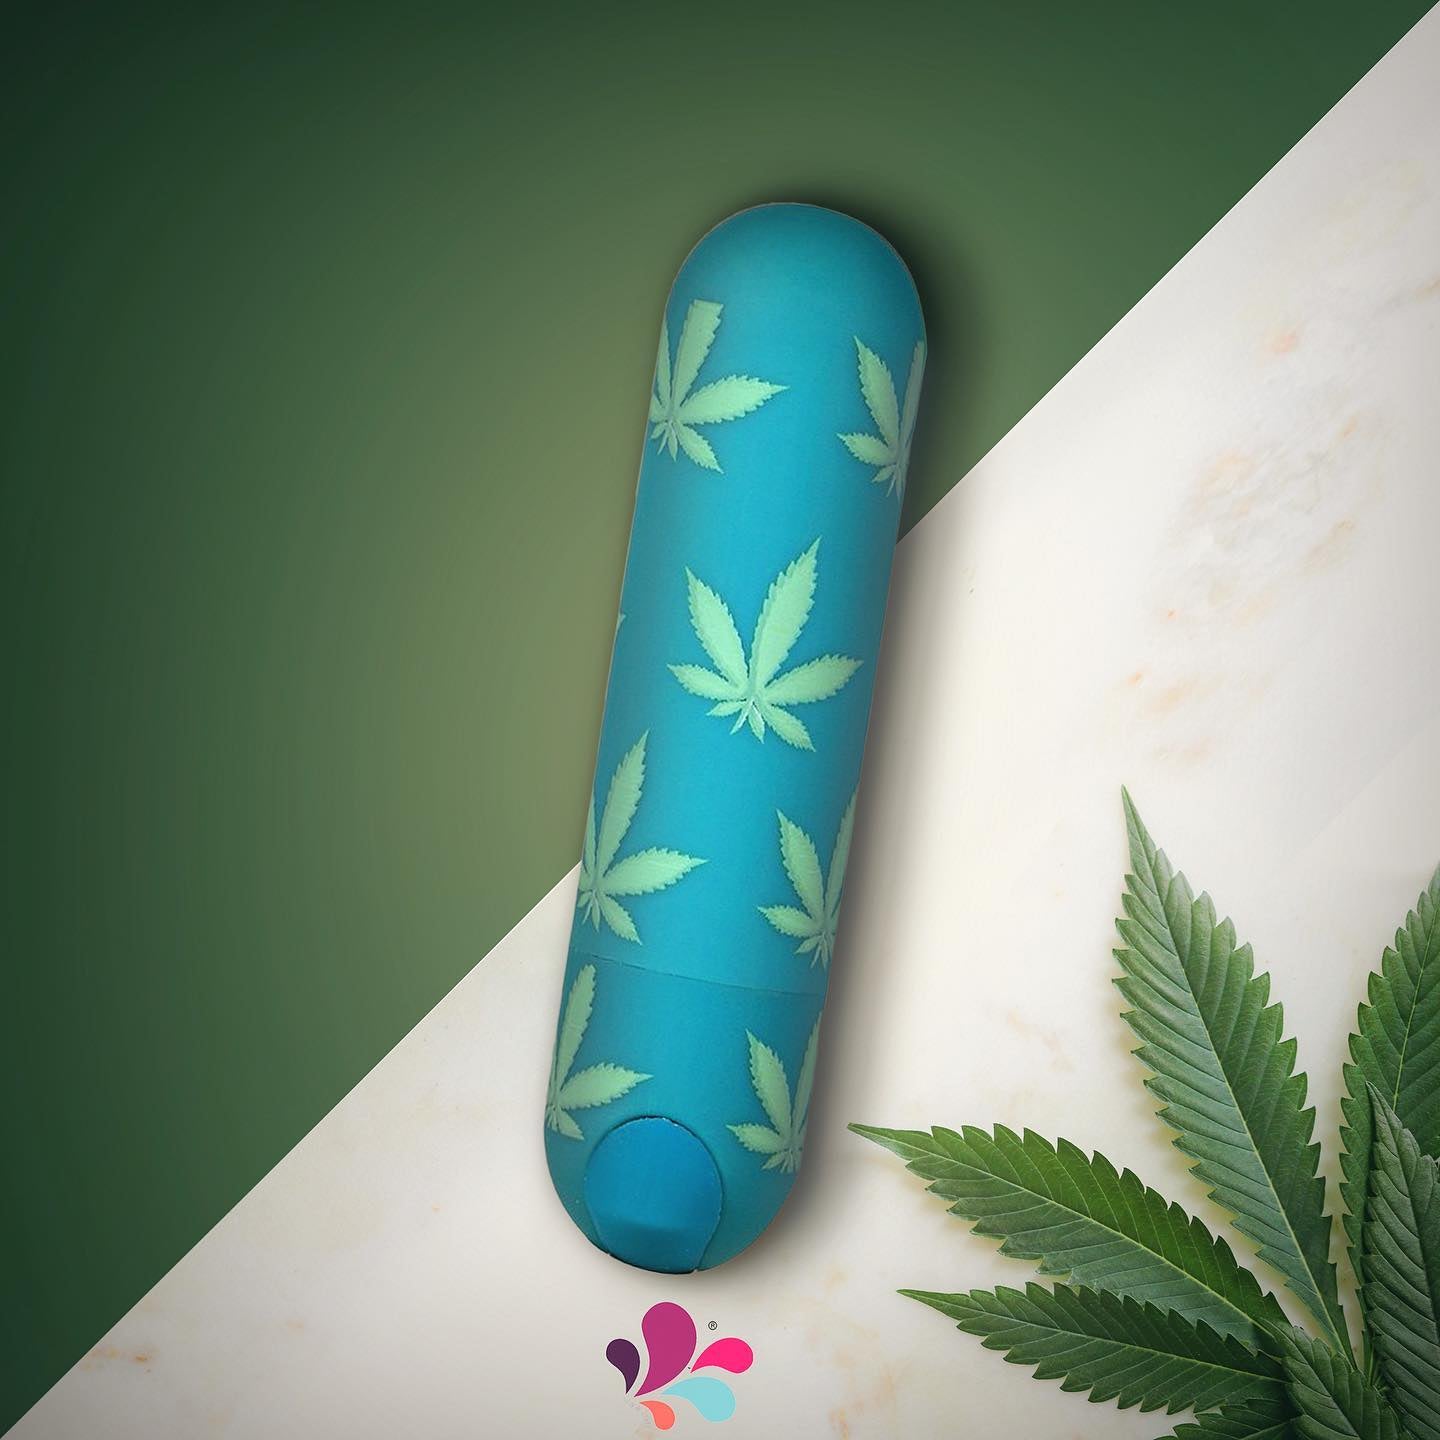 Blue and green bullet vibrator with marijuana leaves